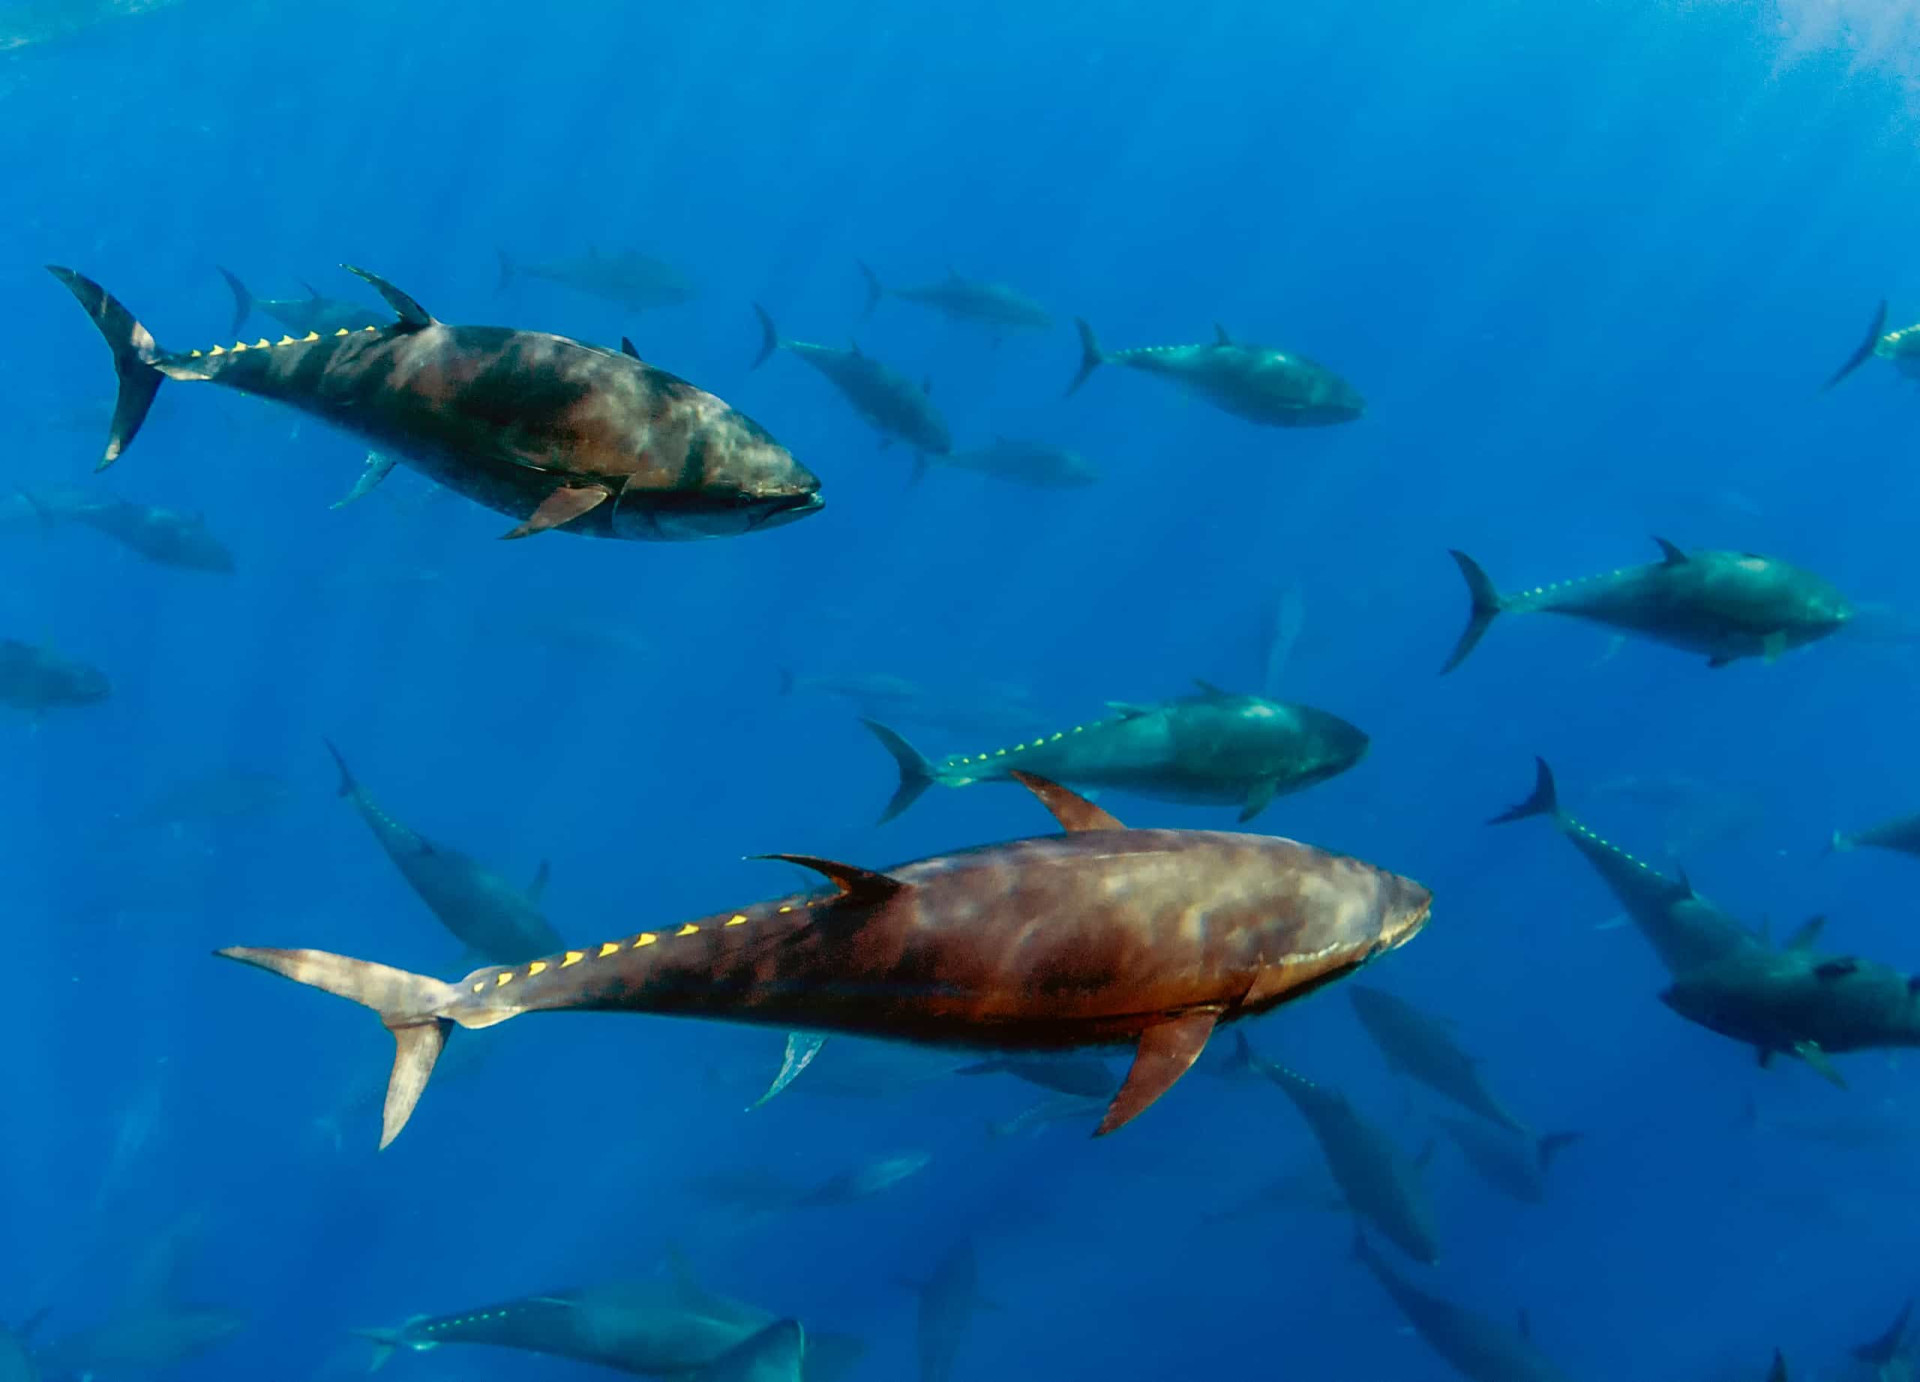 <p>The Atlantic bluefin is found in both the western and eastern Atlantic Ocean, as well as the Mediterranean Sea. It is known for being one of the largest, fastest, and most visually appealing fish worldwide, but sadly, it is also highly endangered.</p><p><a href="https://www.msn.com/en-us/community/channel/vid-7xx8mnucu55yw63we9va2gwr7uihbxwc68fxqp25x6tg4ftibpra?cvid=94631541bc0f4f89bfd59158d696ad7e">Follow us and access great exclusive content every day</a></p>